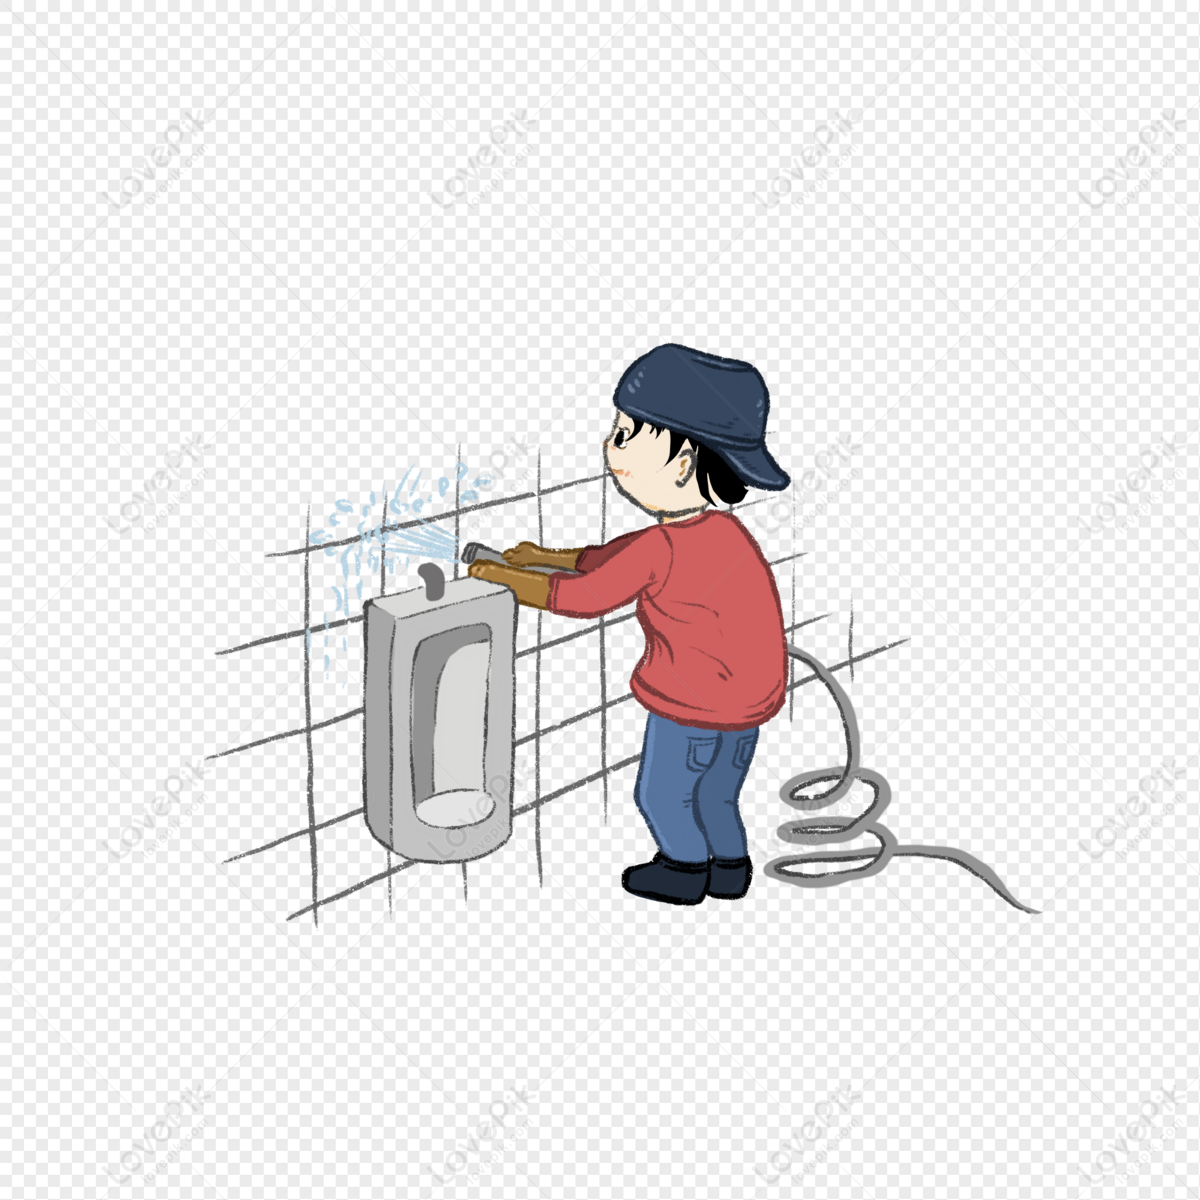 Cartoon Cleaner Cleaning The Toilet Illustration PNG Free Download And  Clipart Image For Free Download - Lovepik | 401194813